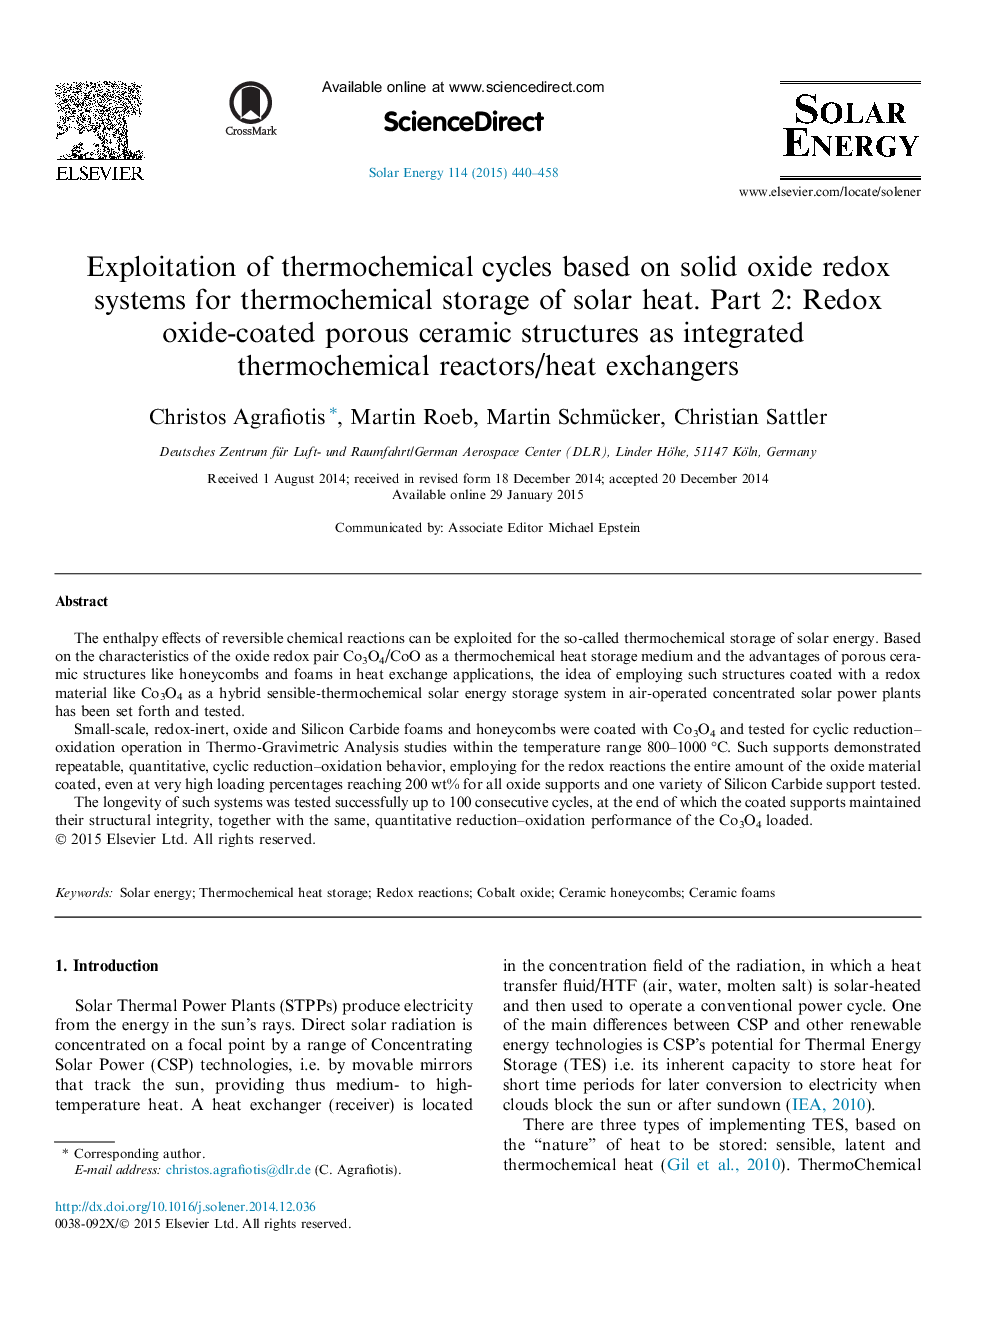 Exploitation of thermochemical cycles based on solid oxide redox systems for thermochemical storage of solar heat. Part 2: Redox oxide-coated porous ceramic structures as integrated thermochemical reactors/heat exchangers